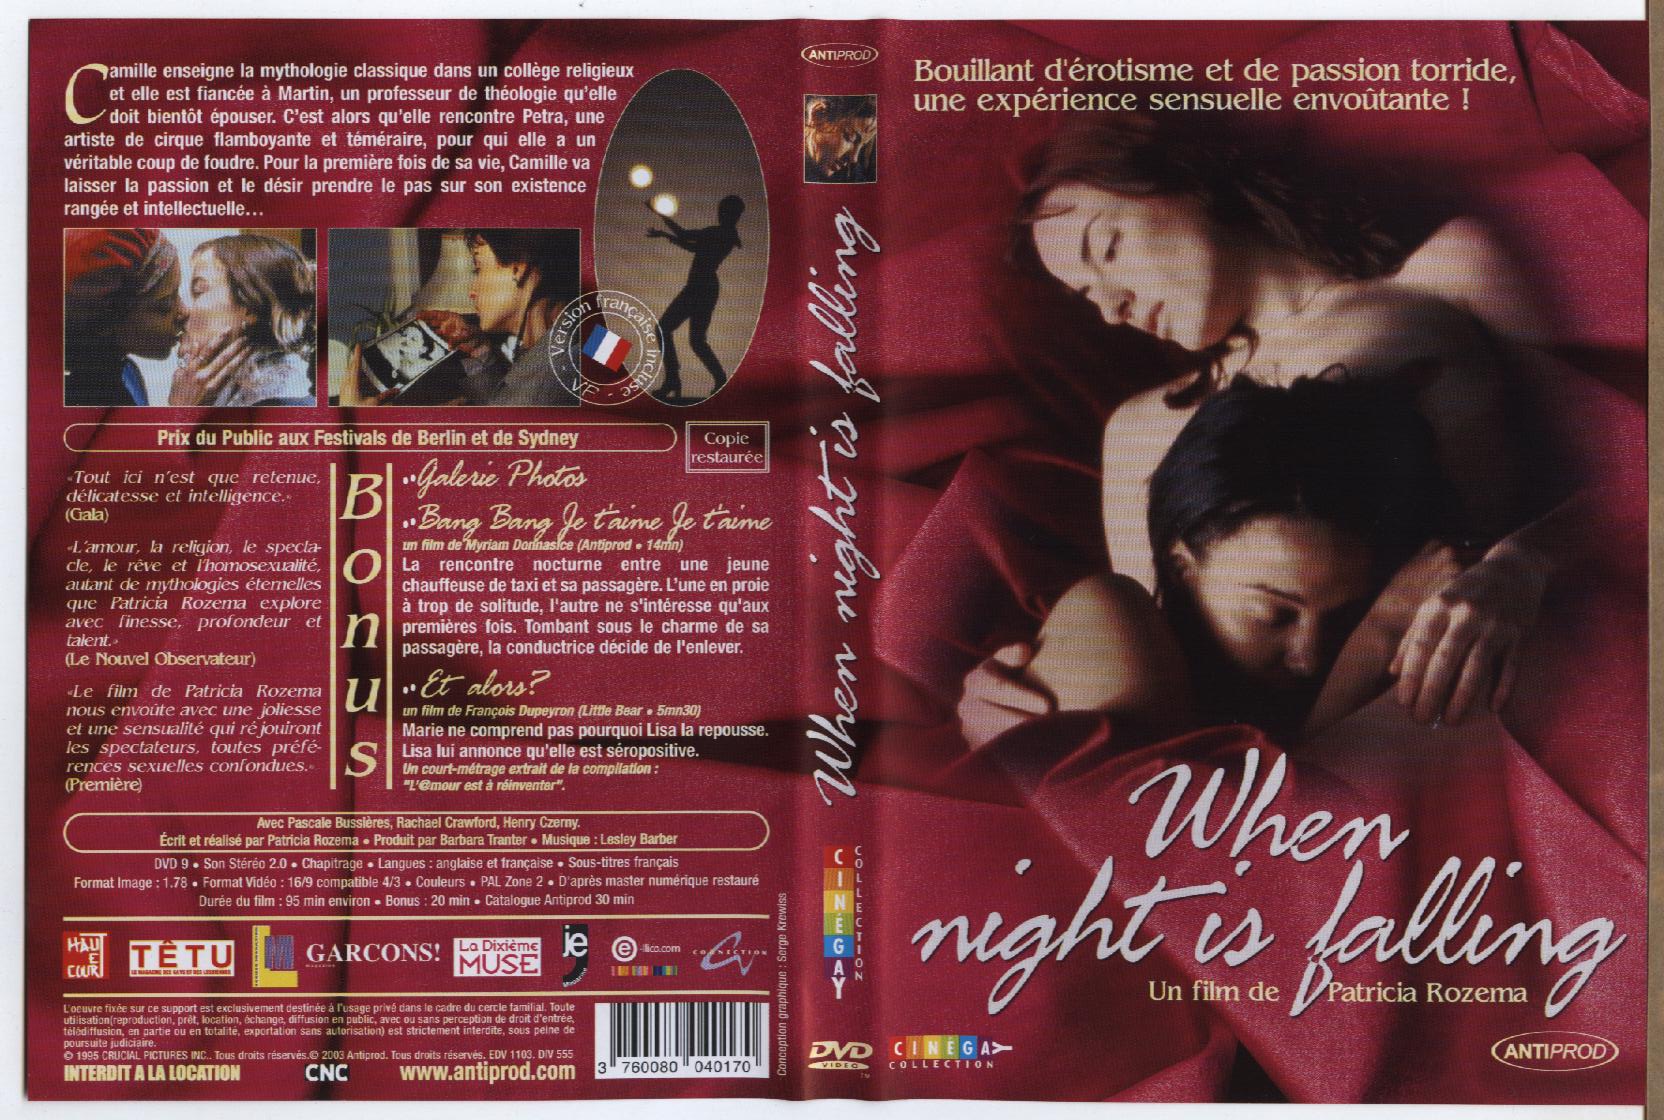 Jaquette DVD When night is falling